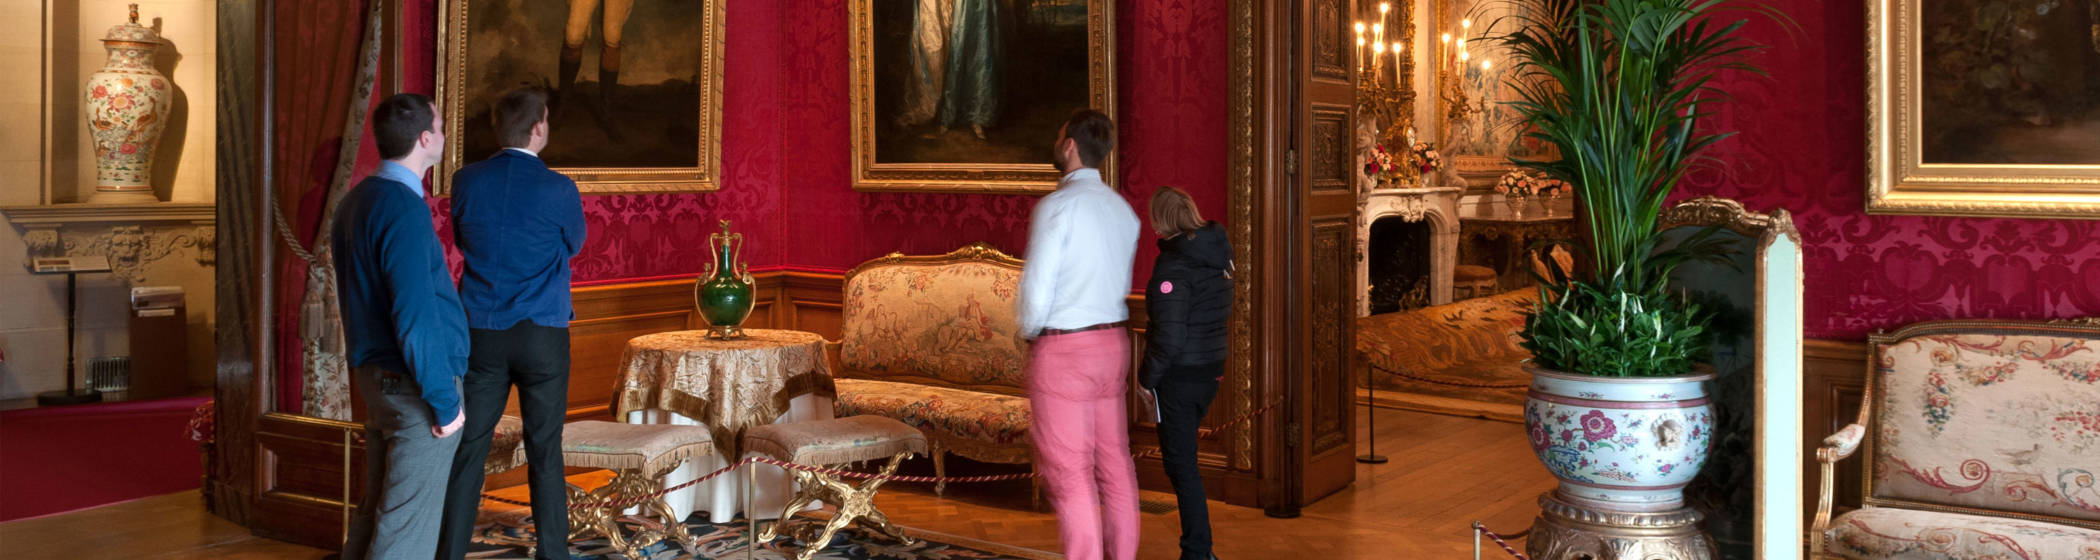 Visitors in the Red Drawing Room